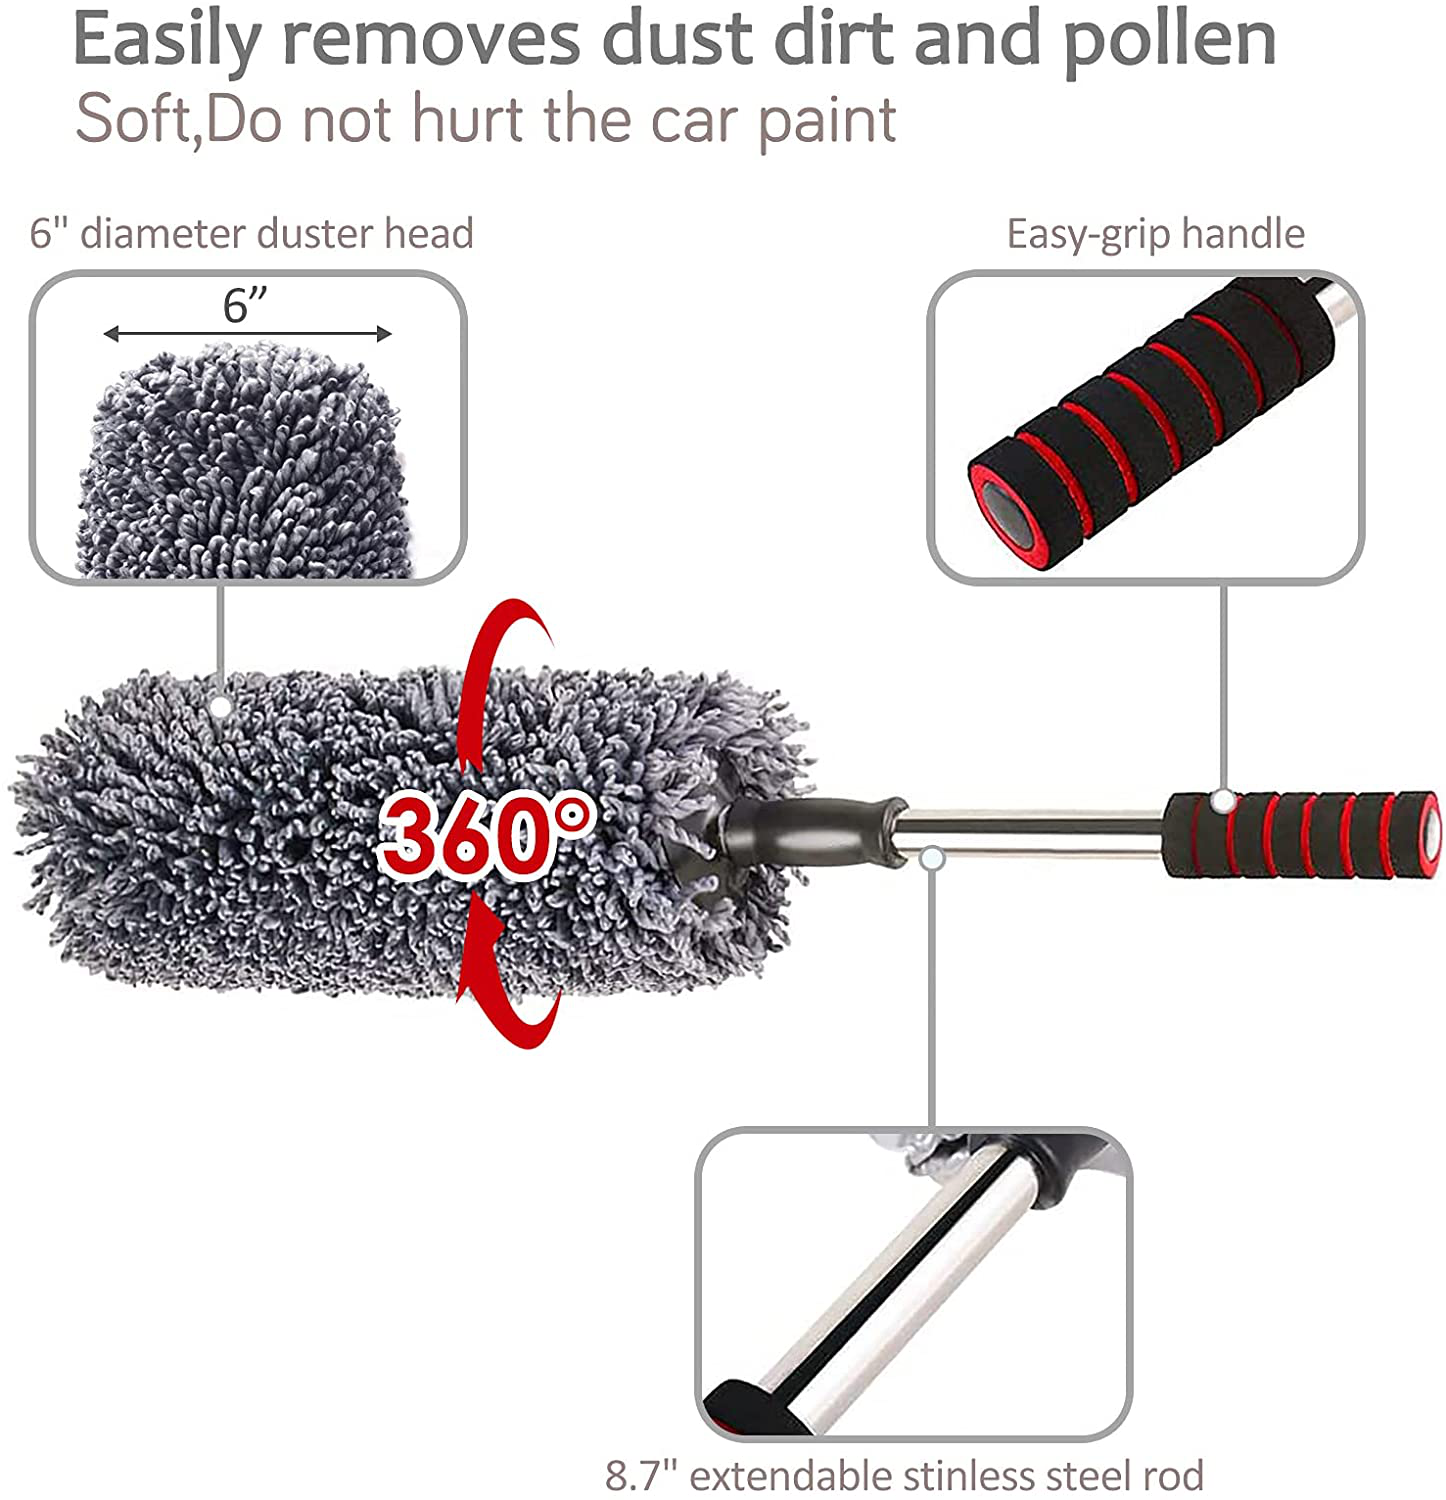 upra Ultimate Car Duster Kit，Best Microfiber Multipurpose Duster,Interior &Exterior Cleaning Tools,Dashboard Detailing Brush,Scratch Lint Free,Pollen Removing,extendable Handle,Tuck,SUV,RV,Set of 4